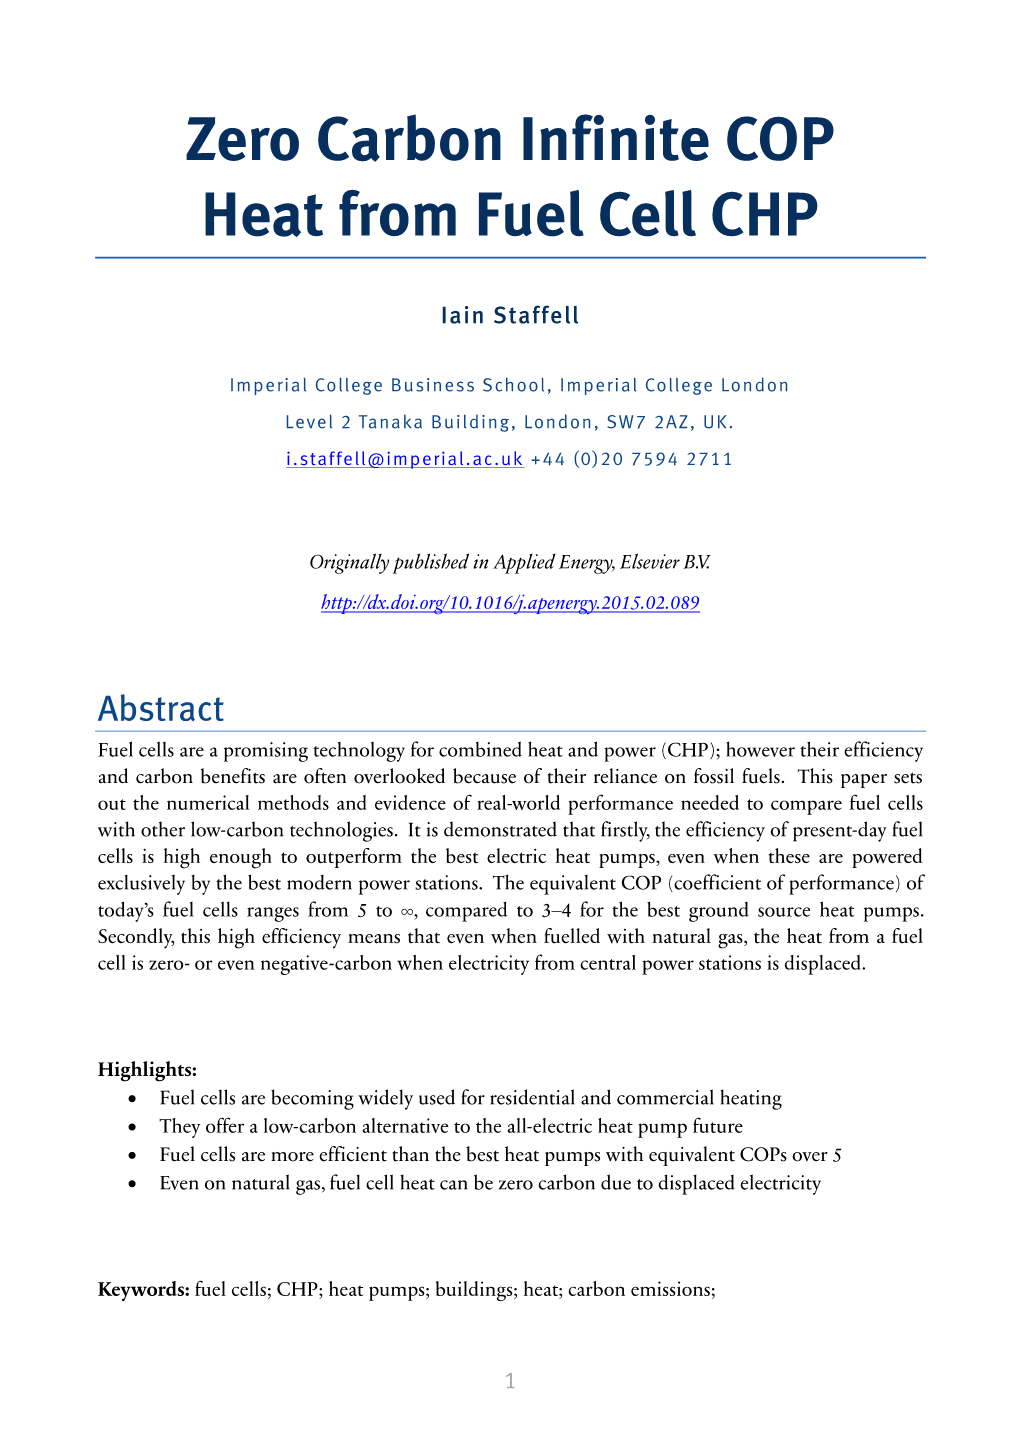 Zero Carbon Infinite COP Heat from Fuel Cell CHP